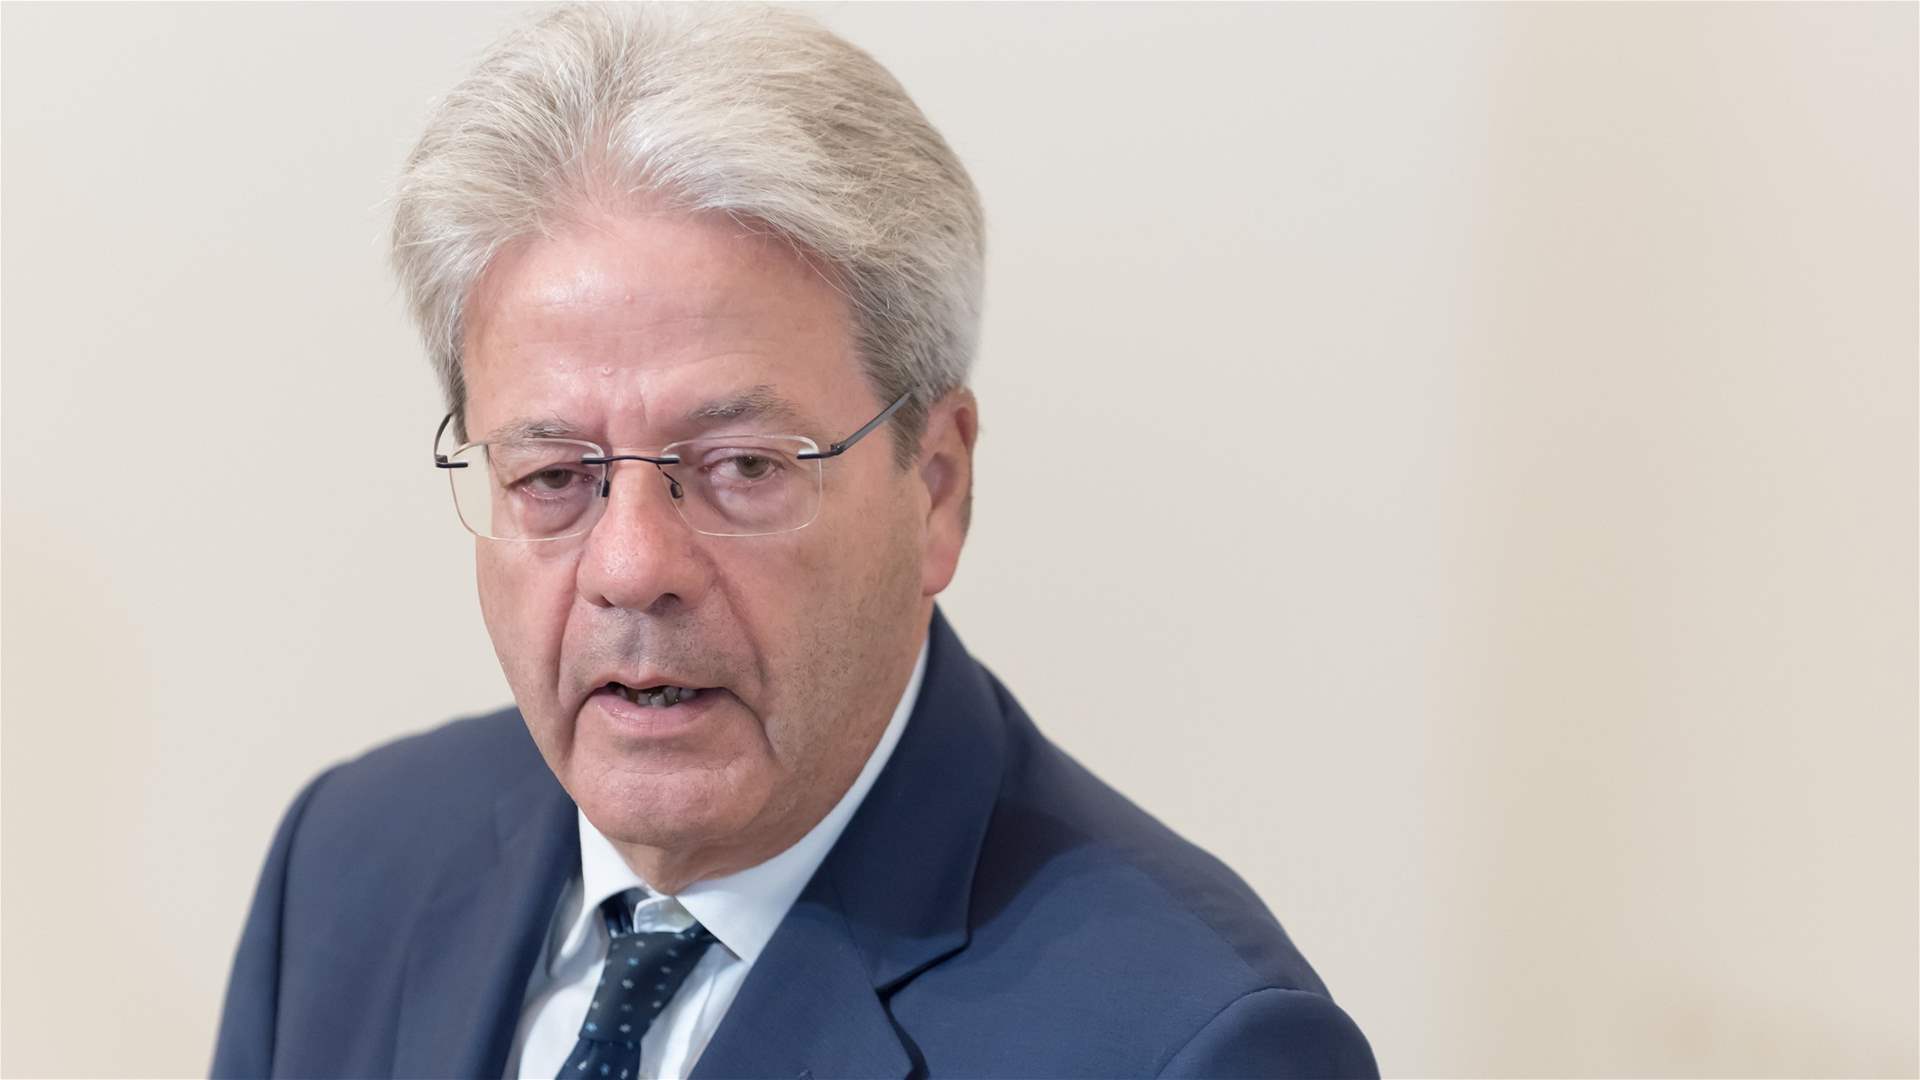 European Sovereignty Fund could finance joint EU projects – Gentiloni